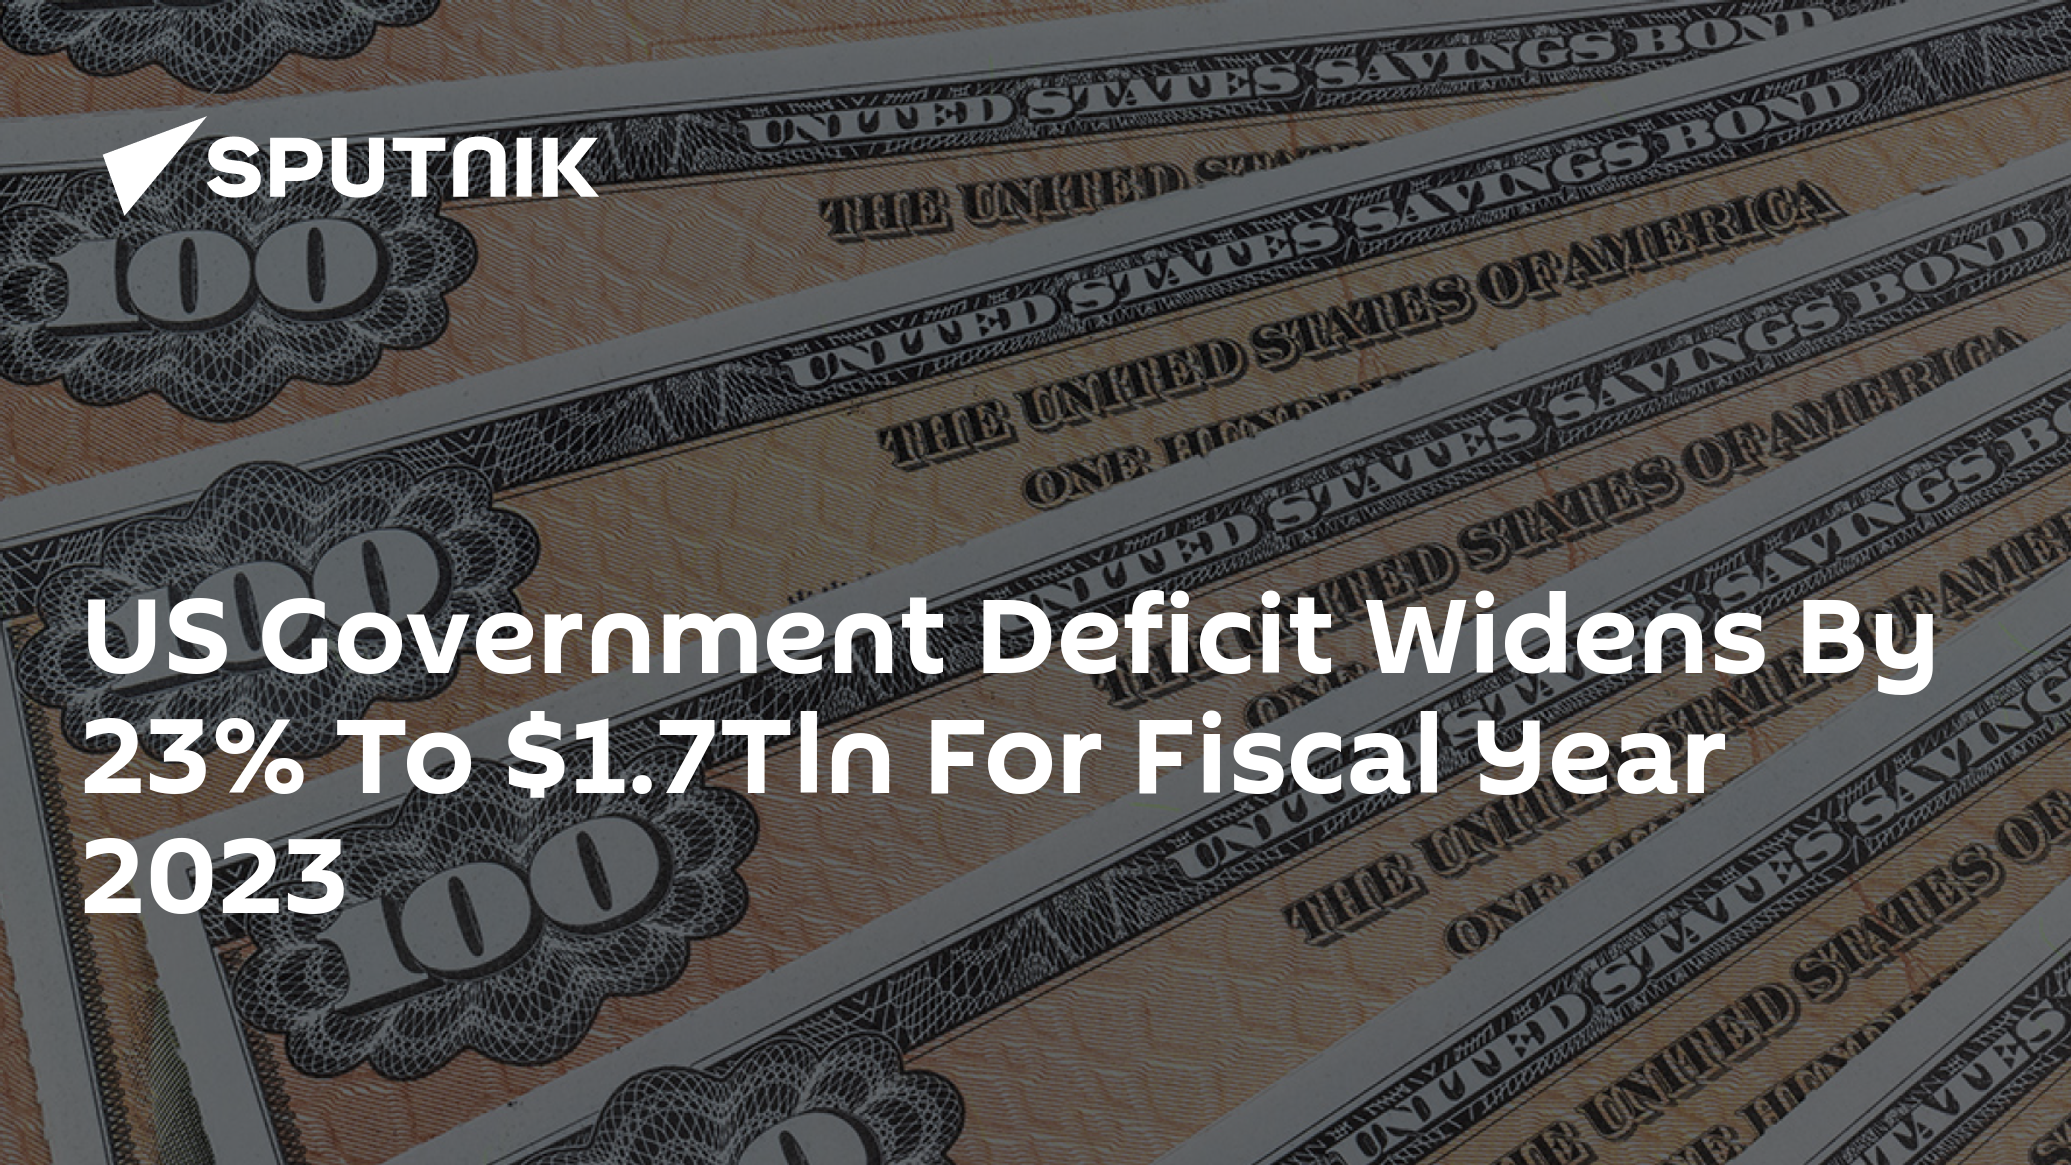 US Government Deficit Widens By 23% To .7Tln For Fiscal Year 2023